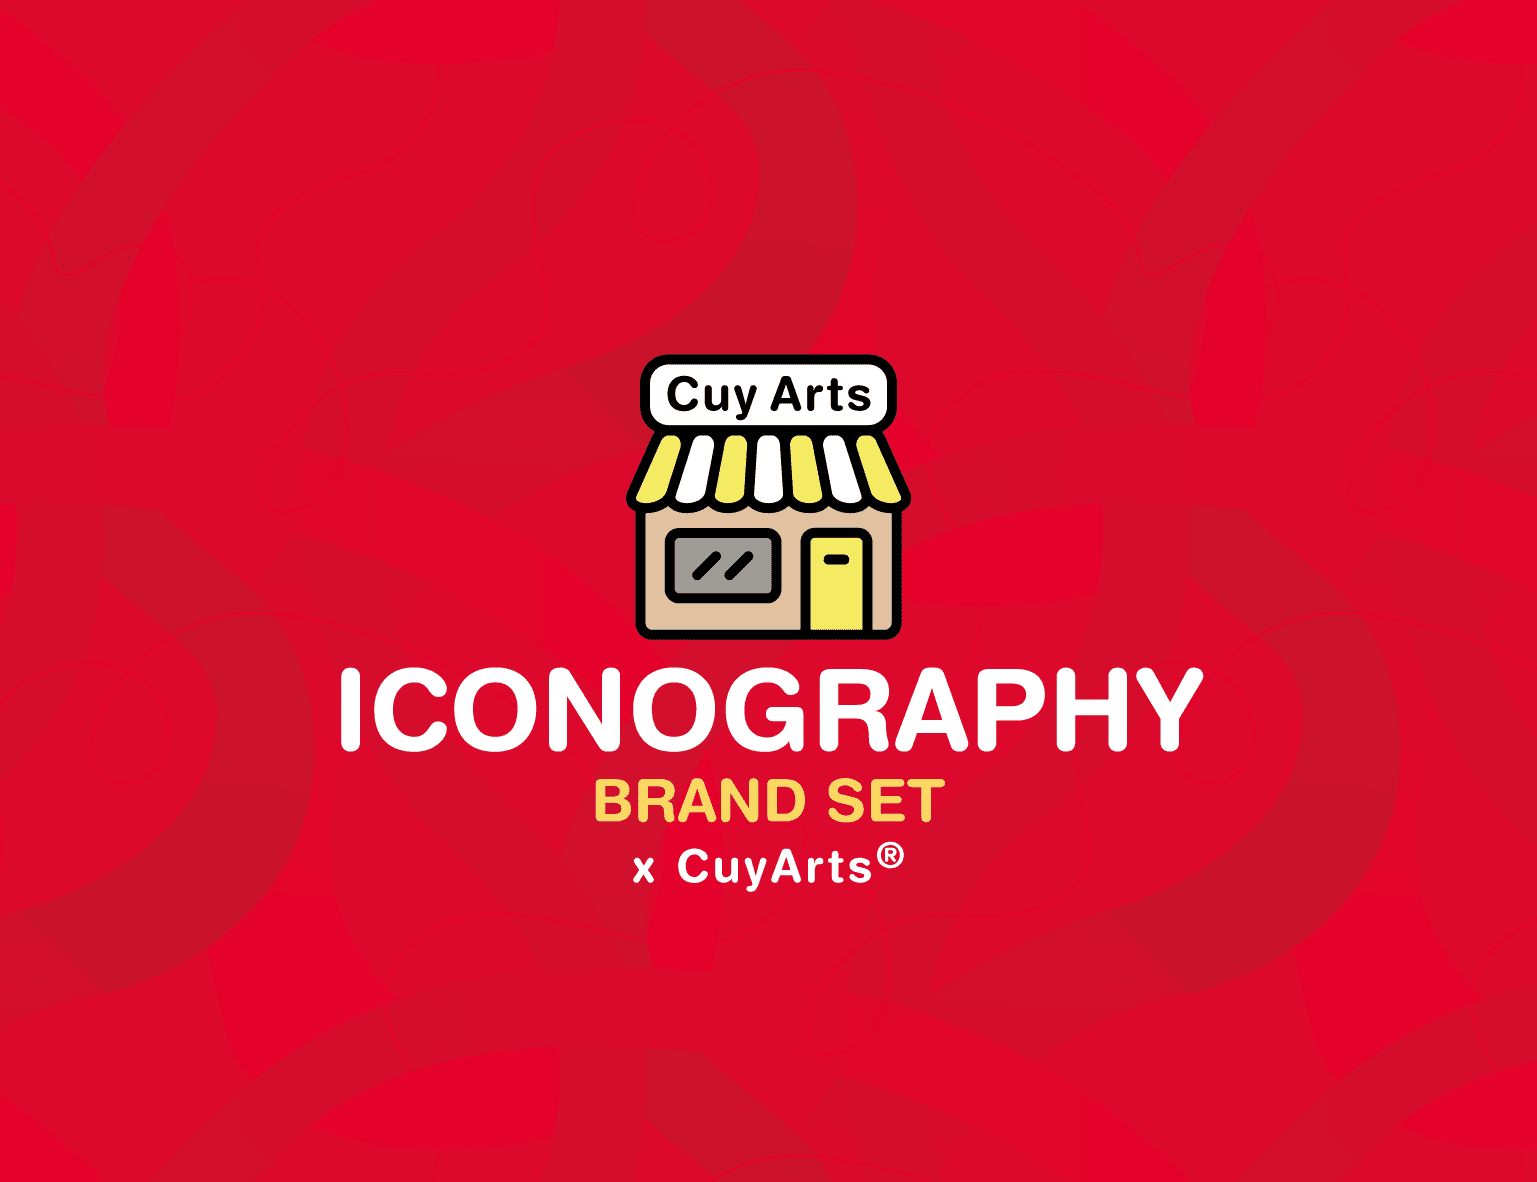 ICONOGRAPHY CUY ARTS cover iconography